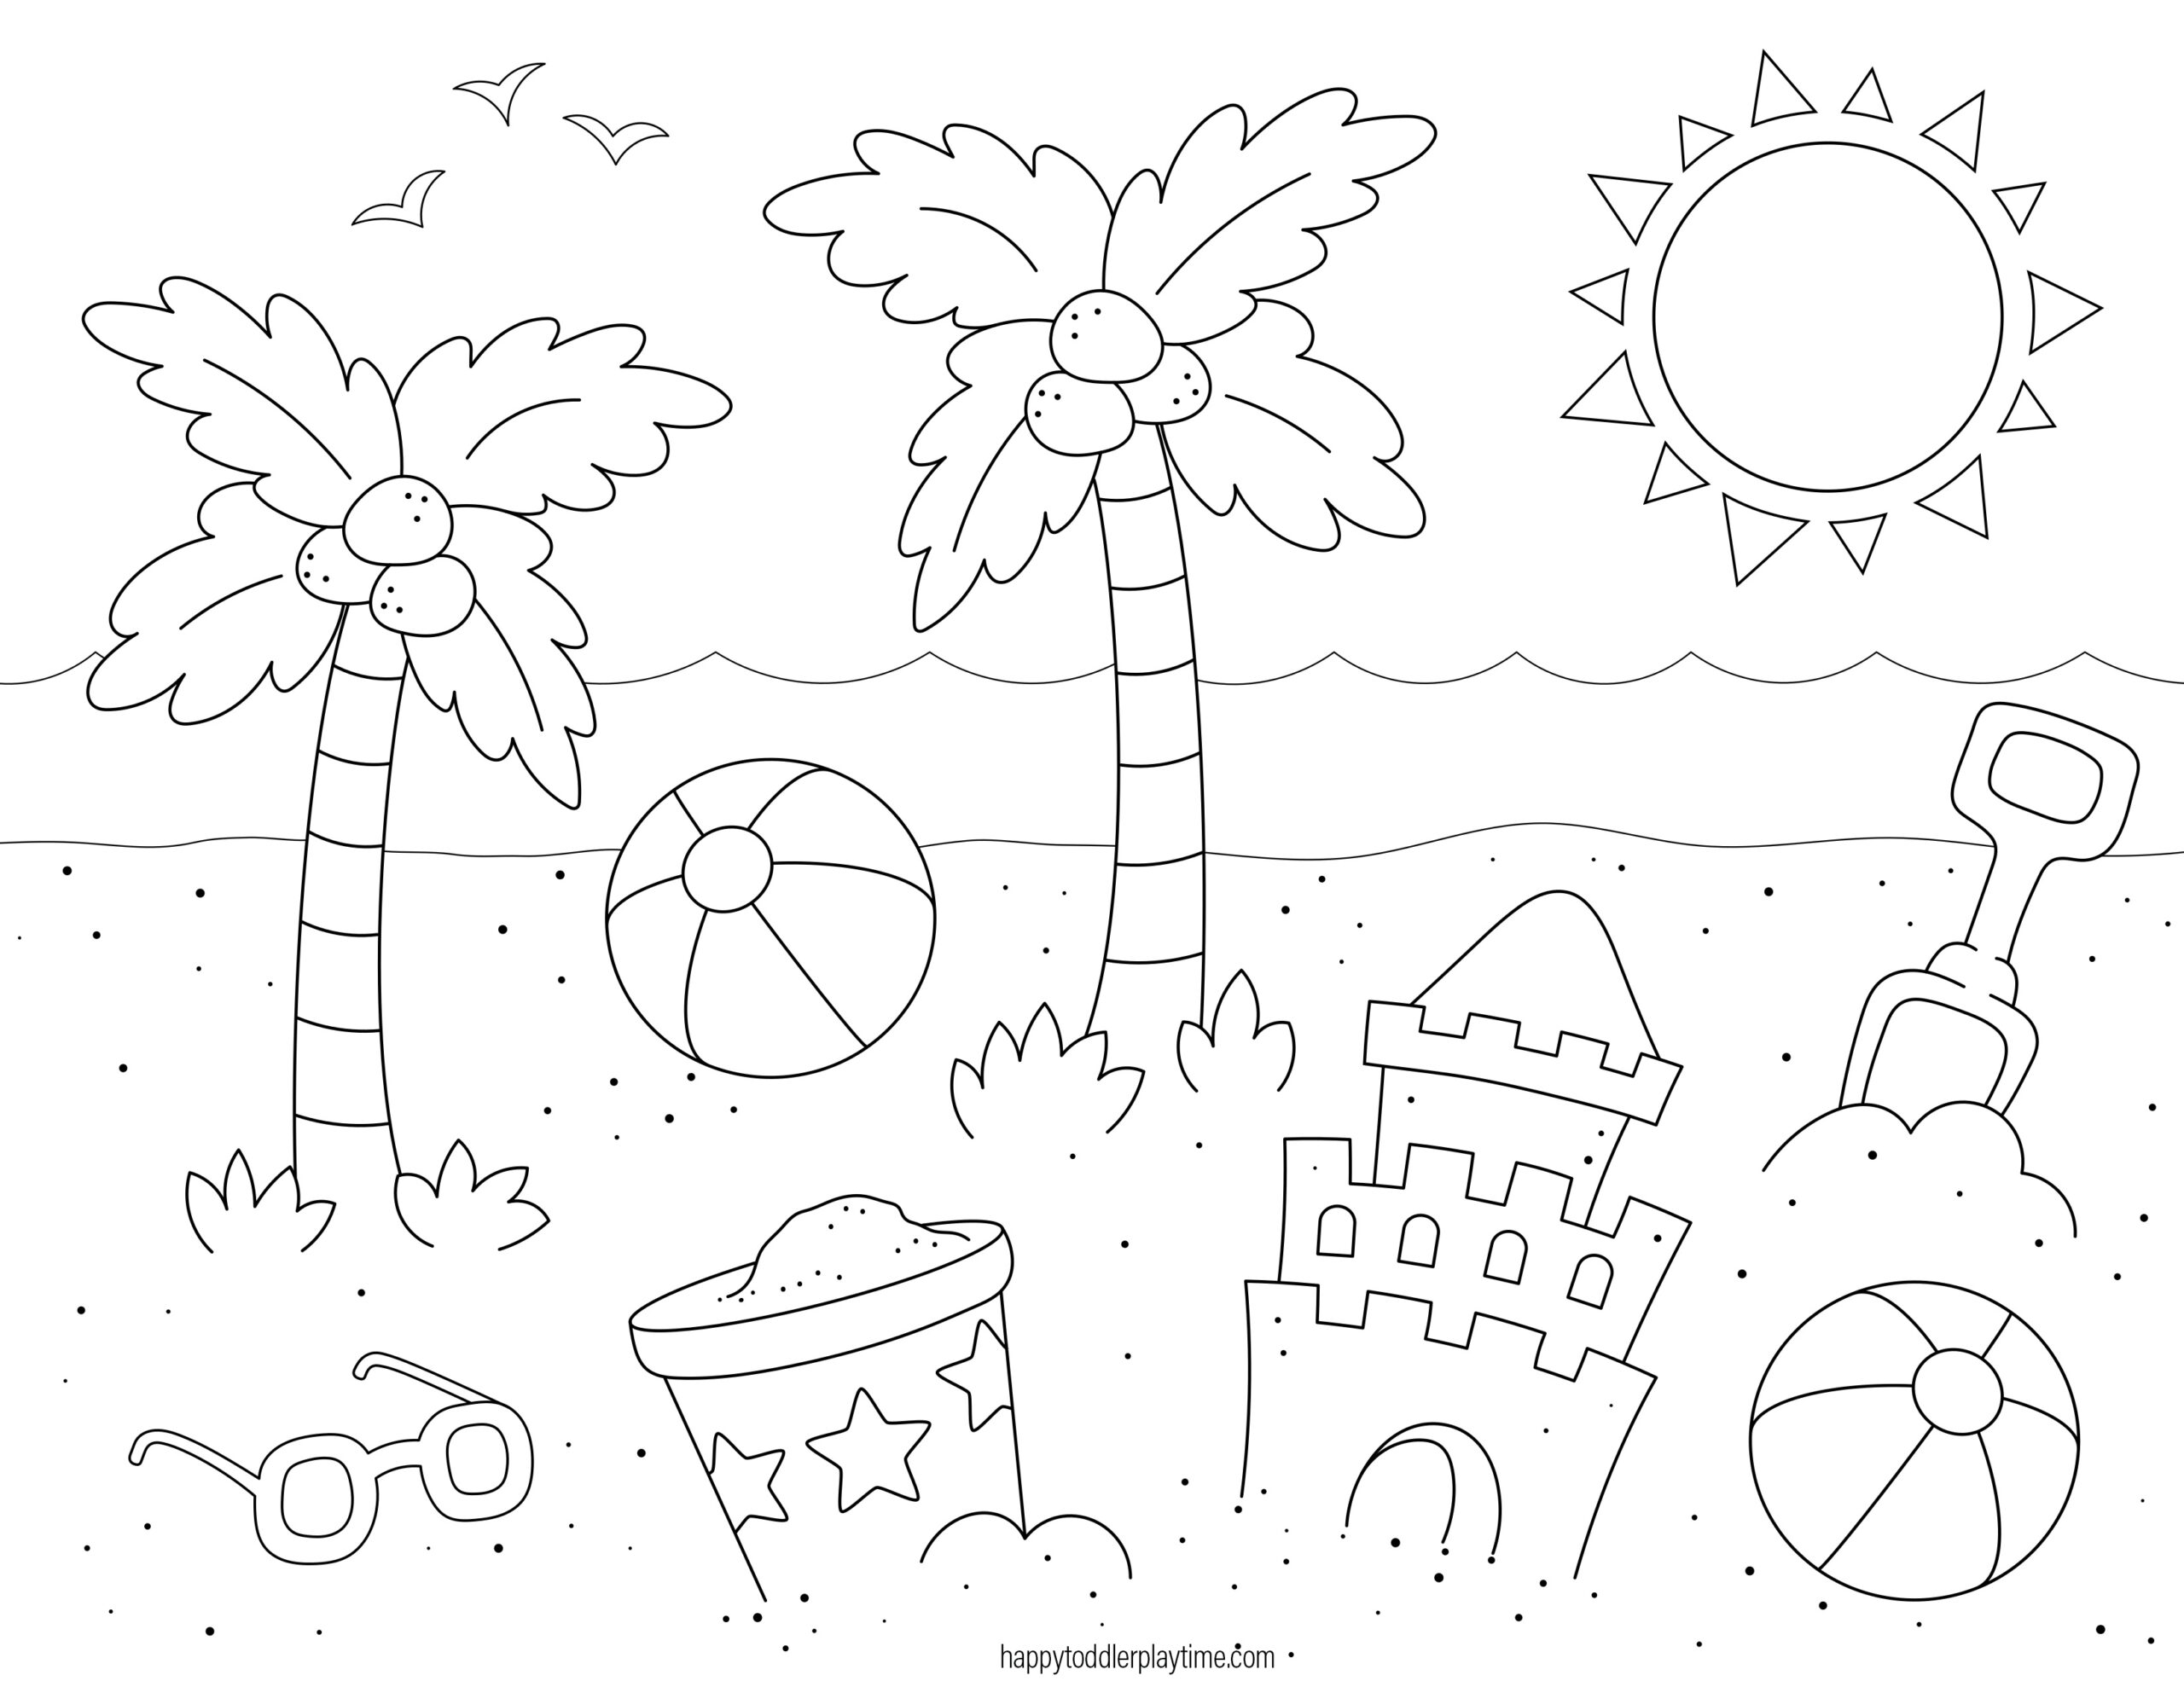 Free printable summer colouring pages for kids